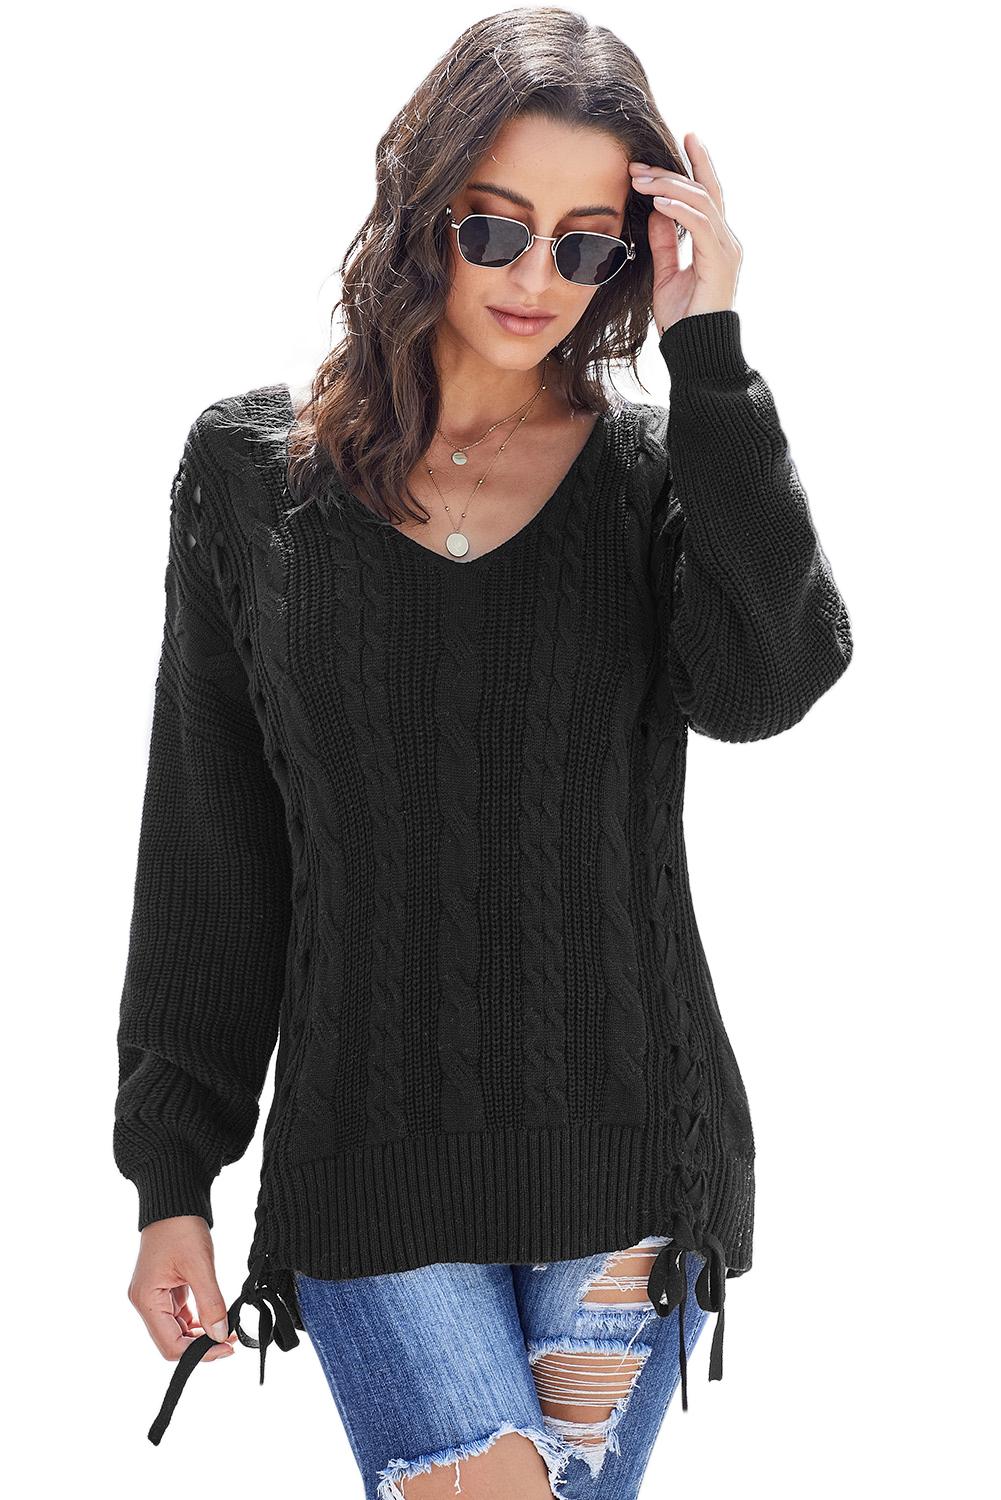 Black Slim Cable Knit Lace Up Sweater